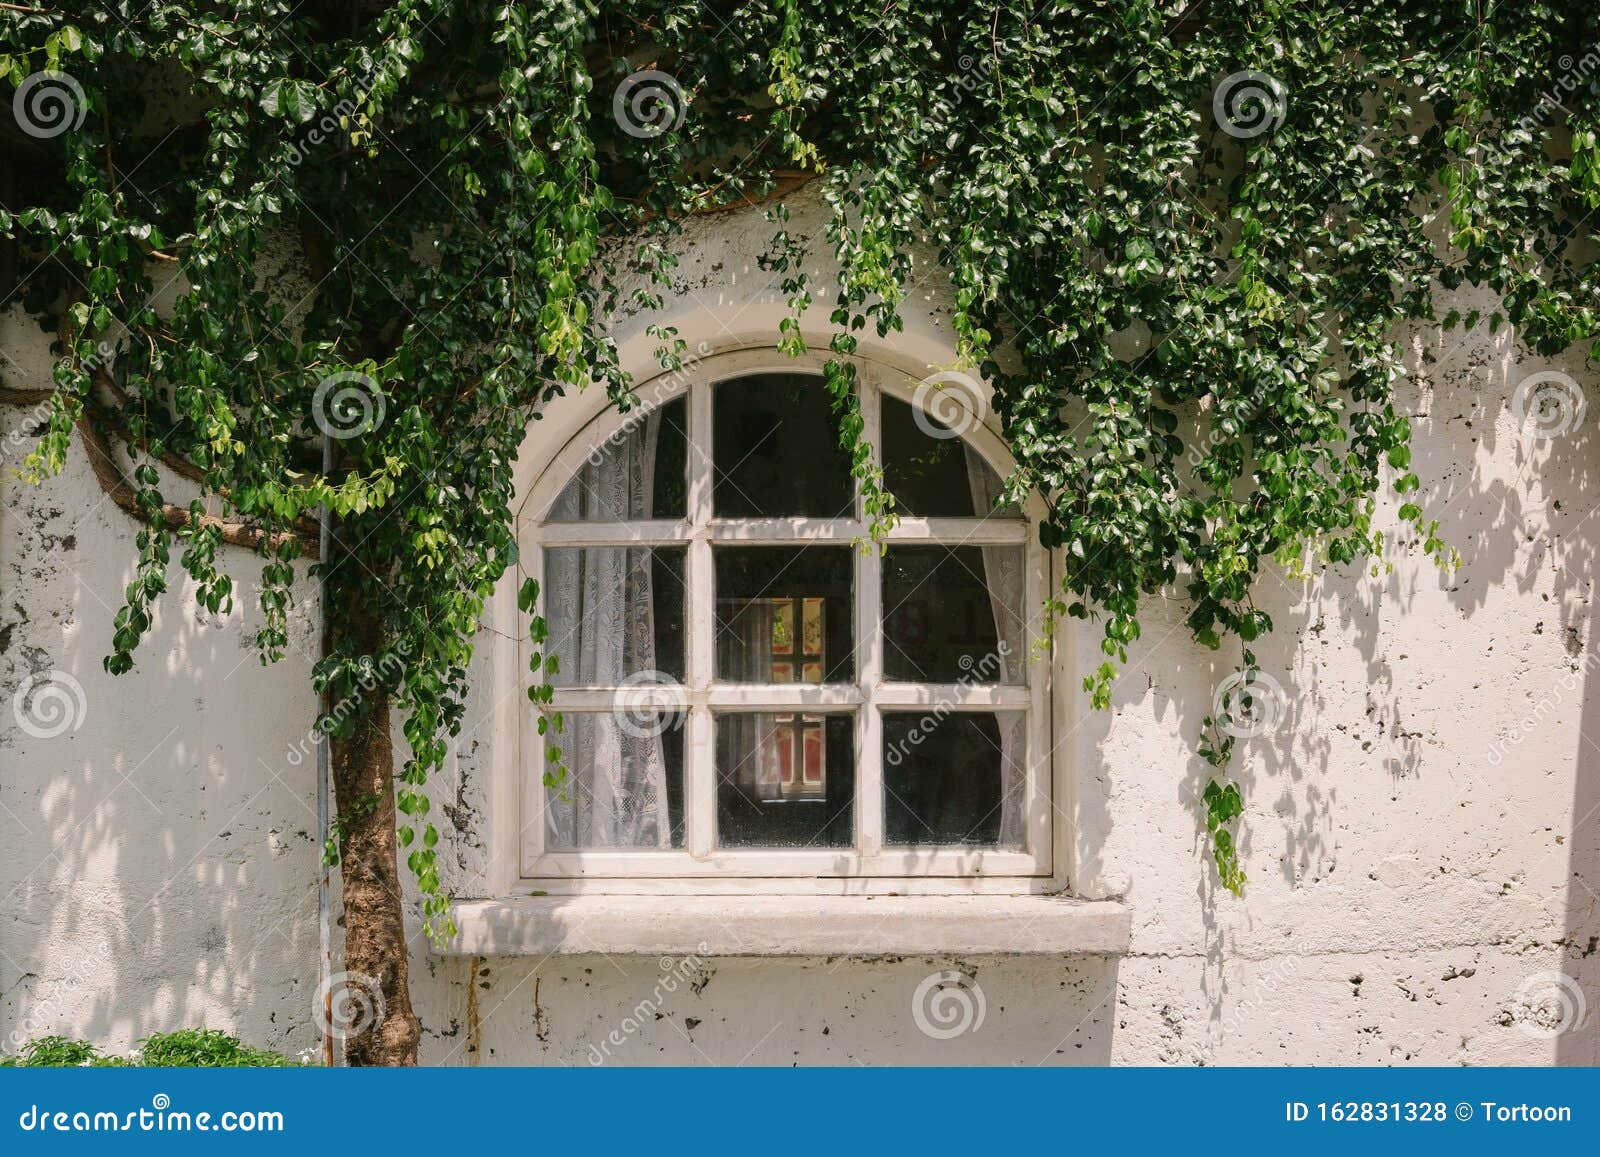 6x4ft Abandoned House Backdrops for Pictures Old Cement Wall Vintage Windows Green Plant Photography Background Portrait Shooting Video Display TV Film Production Vinyl Photo Studio Drapes 